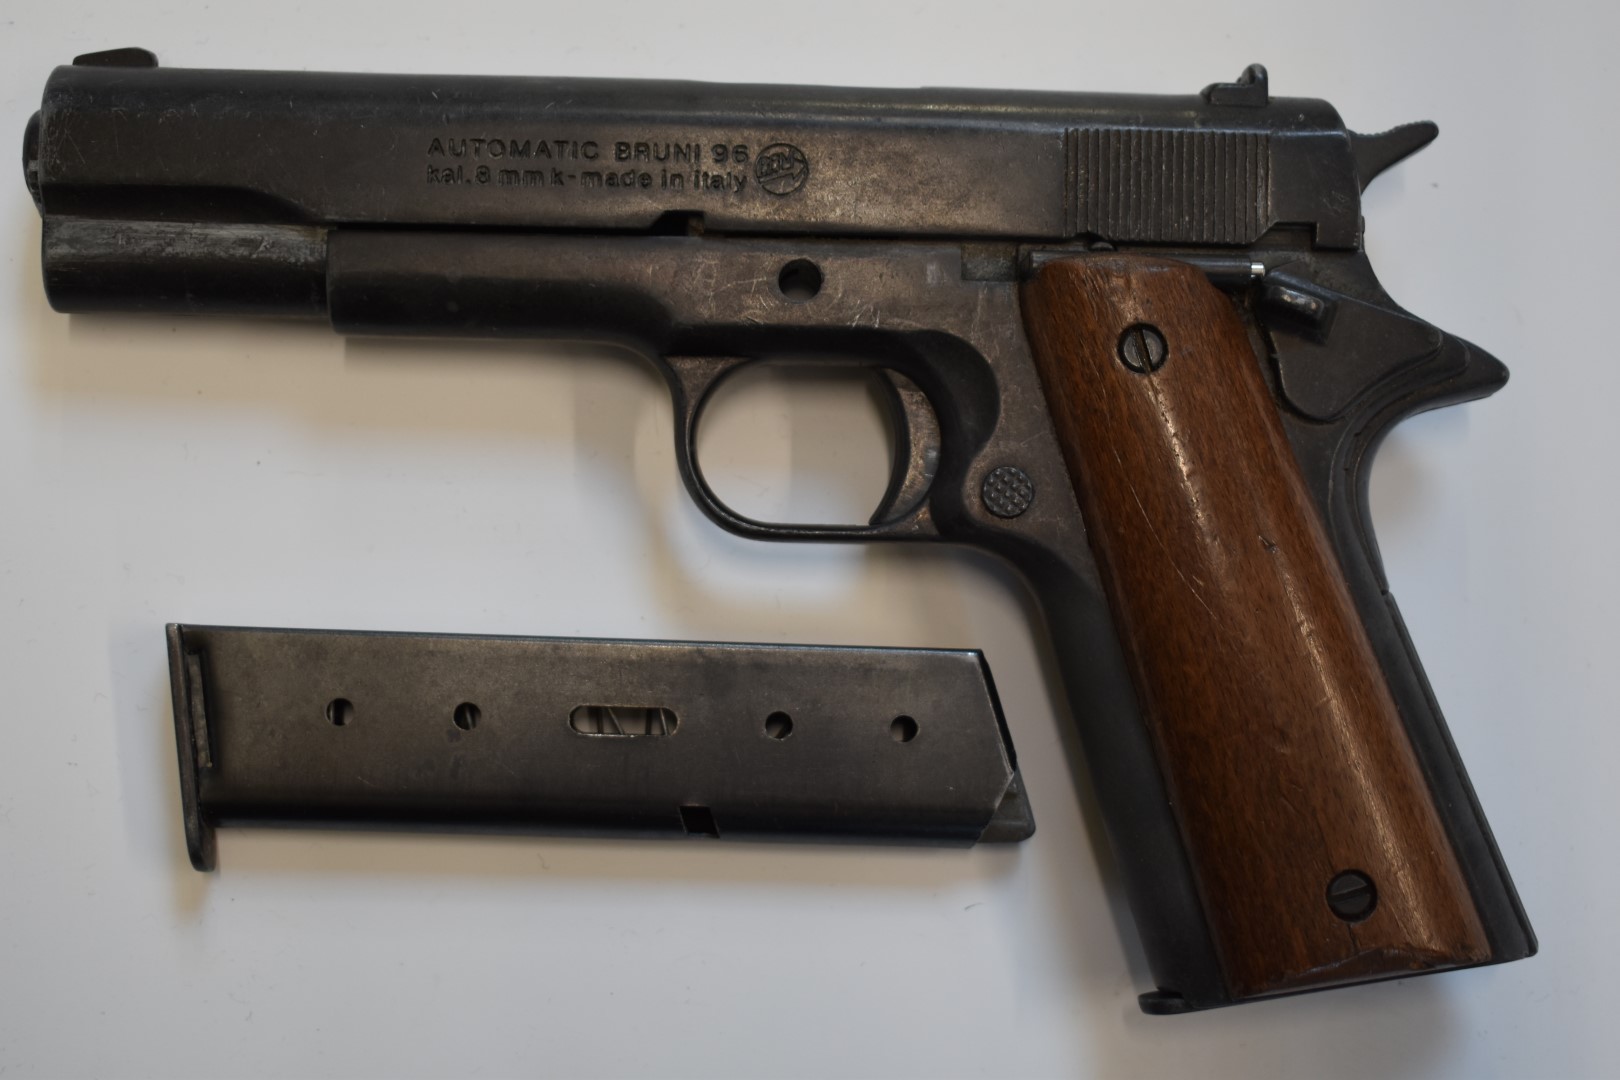 BBM Bruni 96 Automatic 8mm blank firing pistol with wooden grips and a spare magazine. - Image 2 of 4